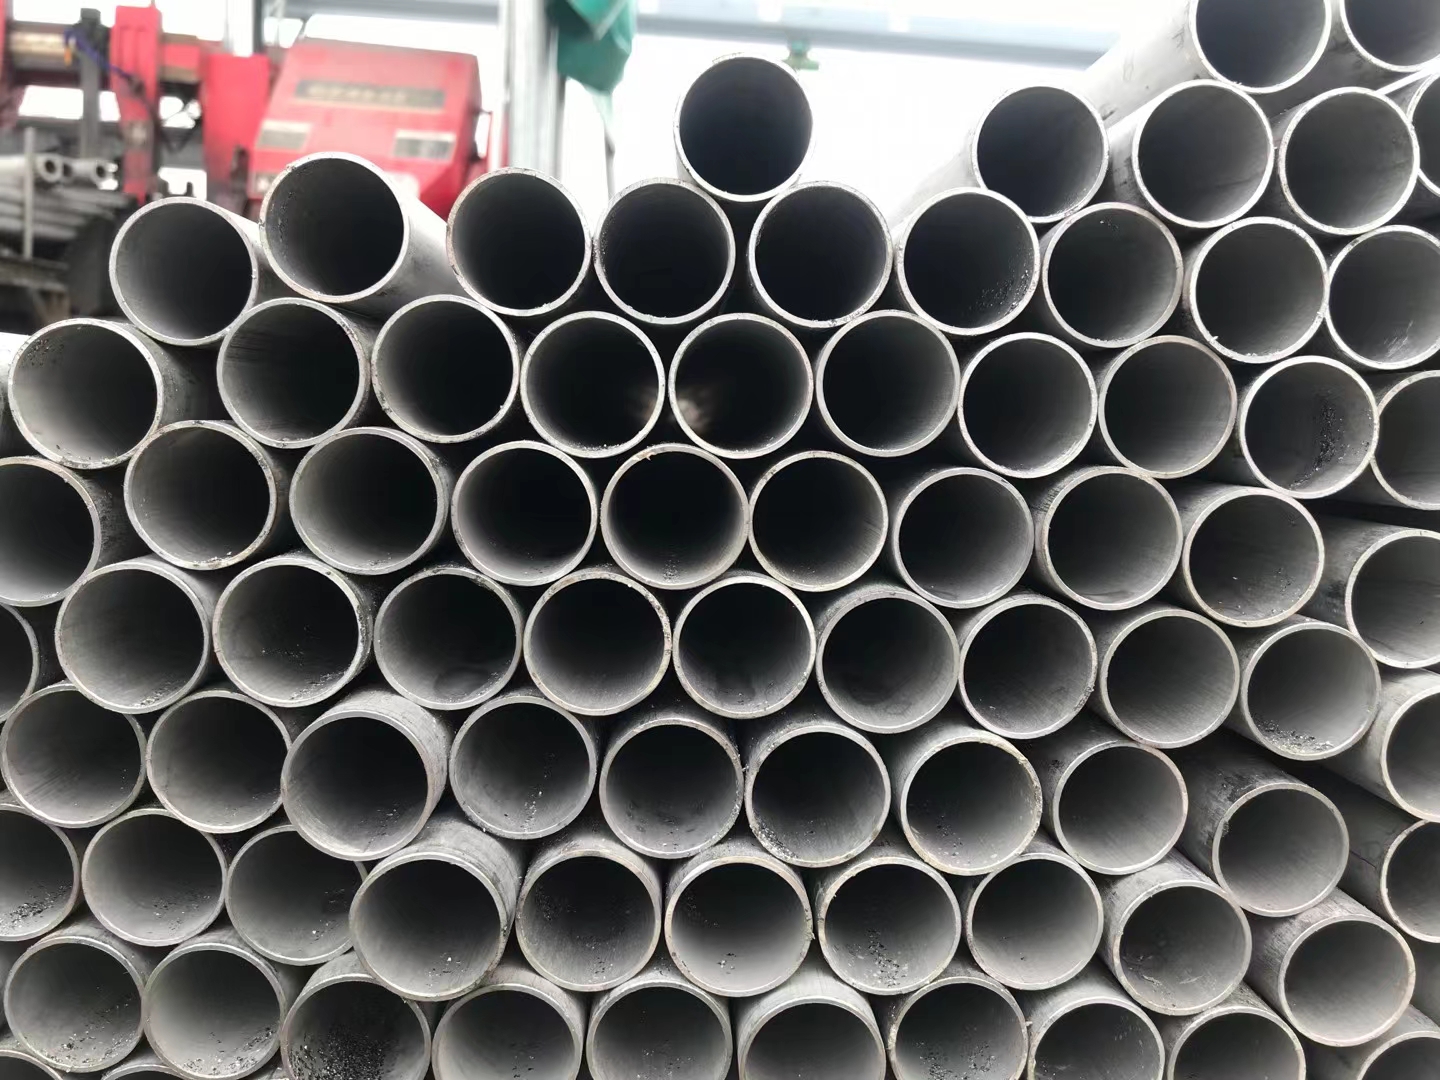 Short Lead Time for Stainless Steel Pipe Diameter -  ASTM A790 UNS S31803 Duplex 2205 Seamless Pipe – Cepheus